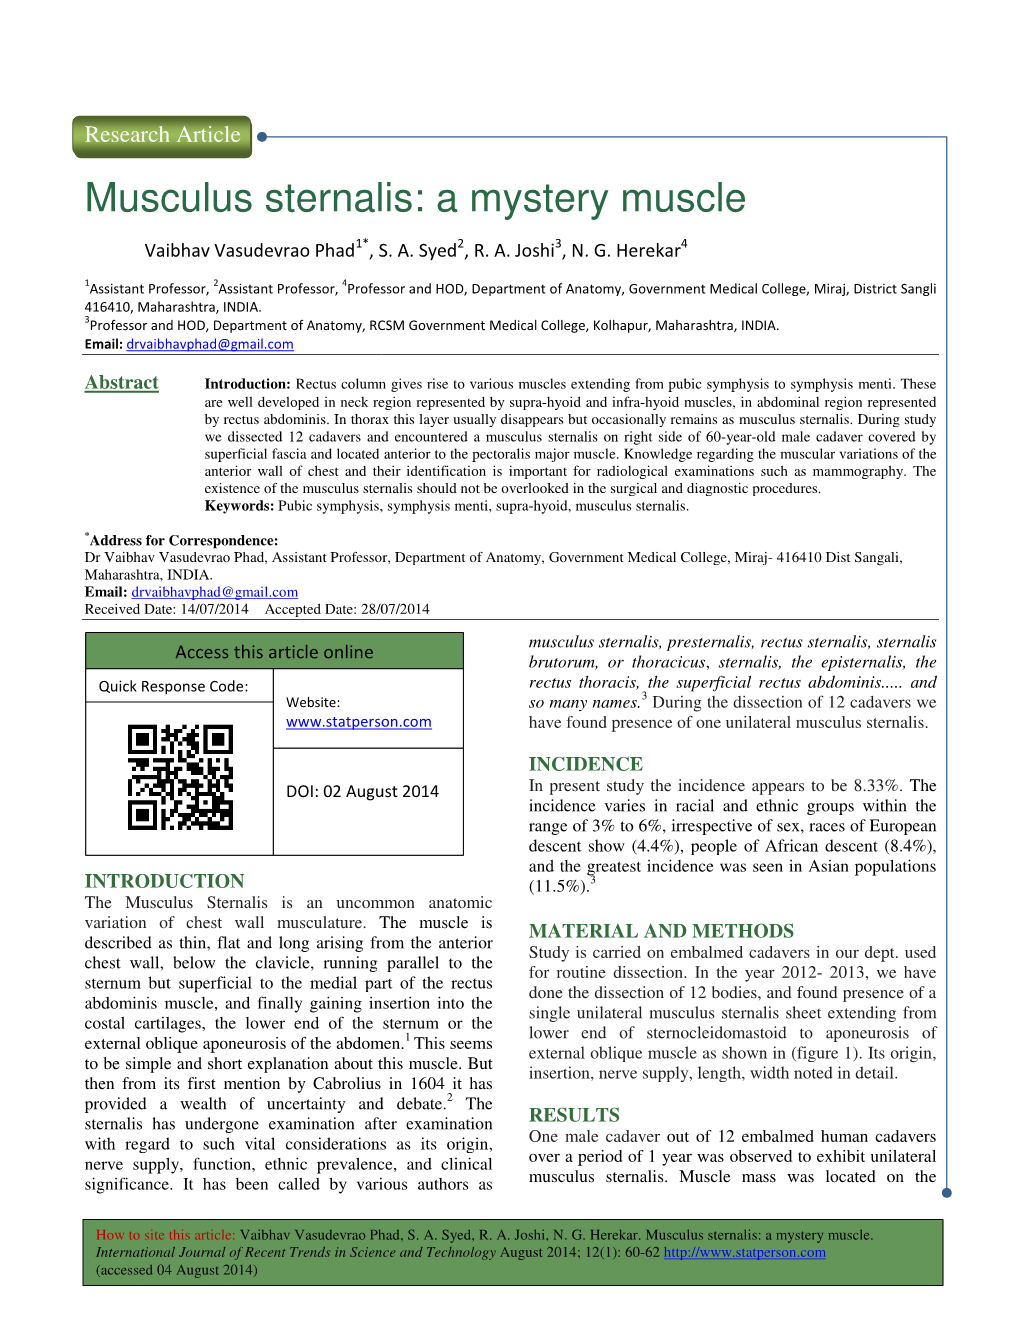 A Mystery Muscle